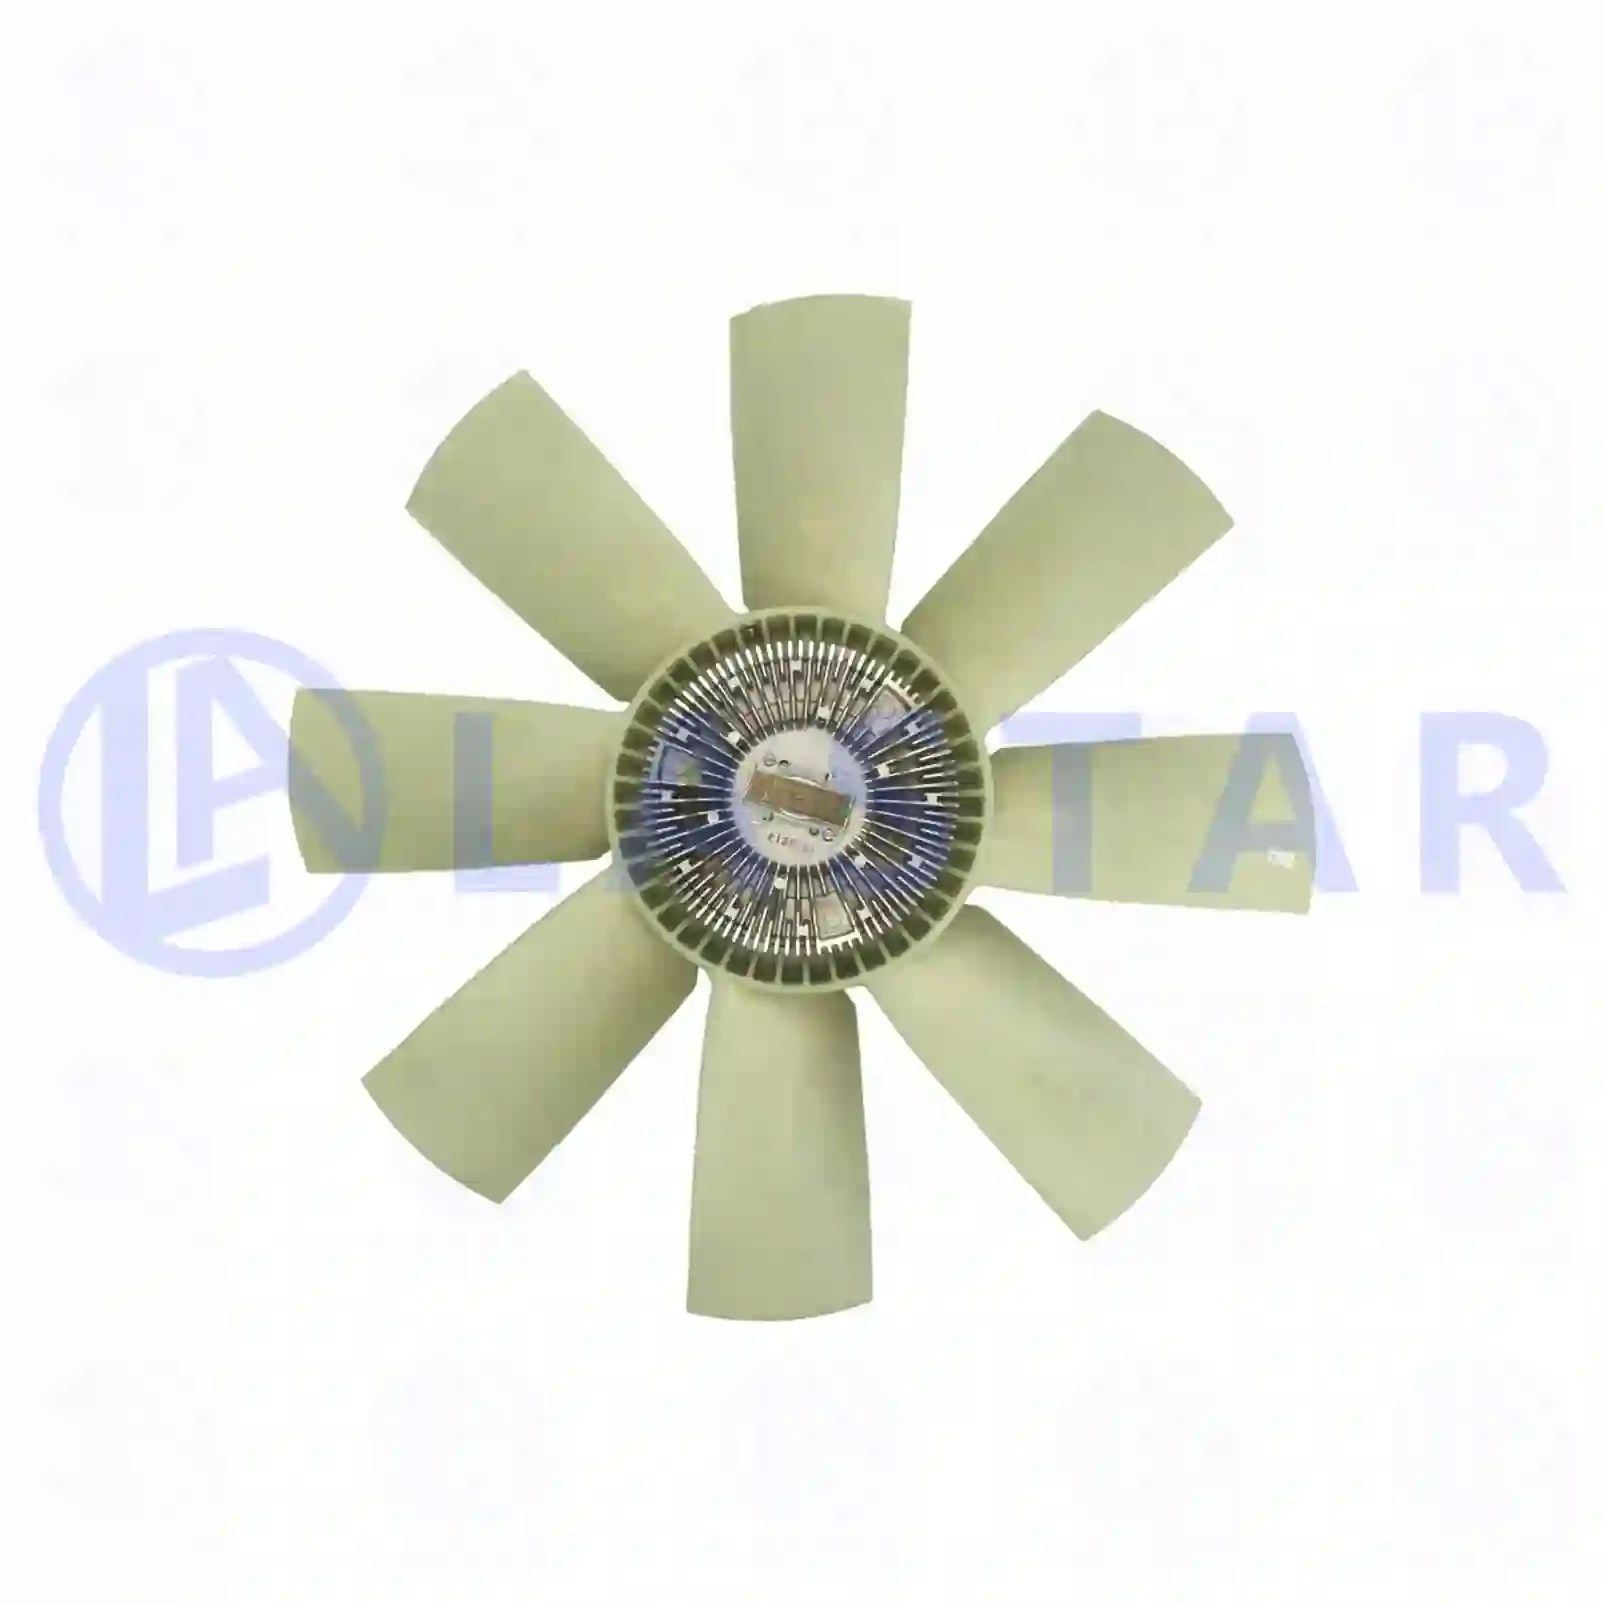 Fan with clutch, 77709419, 20397618, 8500002 ||  77709419 Lastar Spare Part | Truck Spare Parts, Auotomotive Spare Parts Fan with clutch, 77709419, 20397618, 8500002 ||  77709419 Lastar Spare Part | Truck Spare Parts, Auotomotive Spare Parts